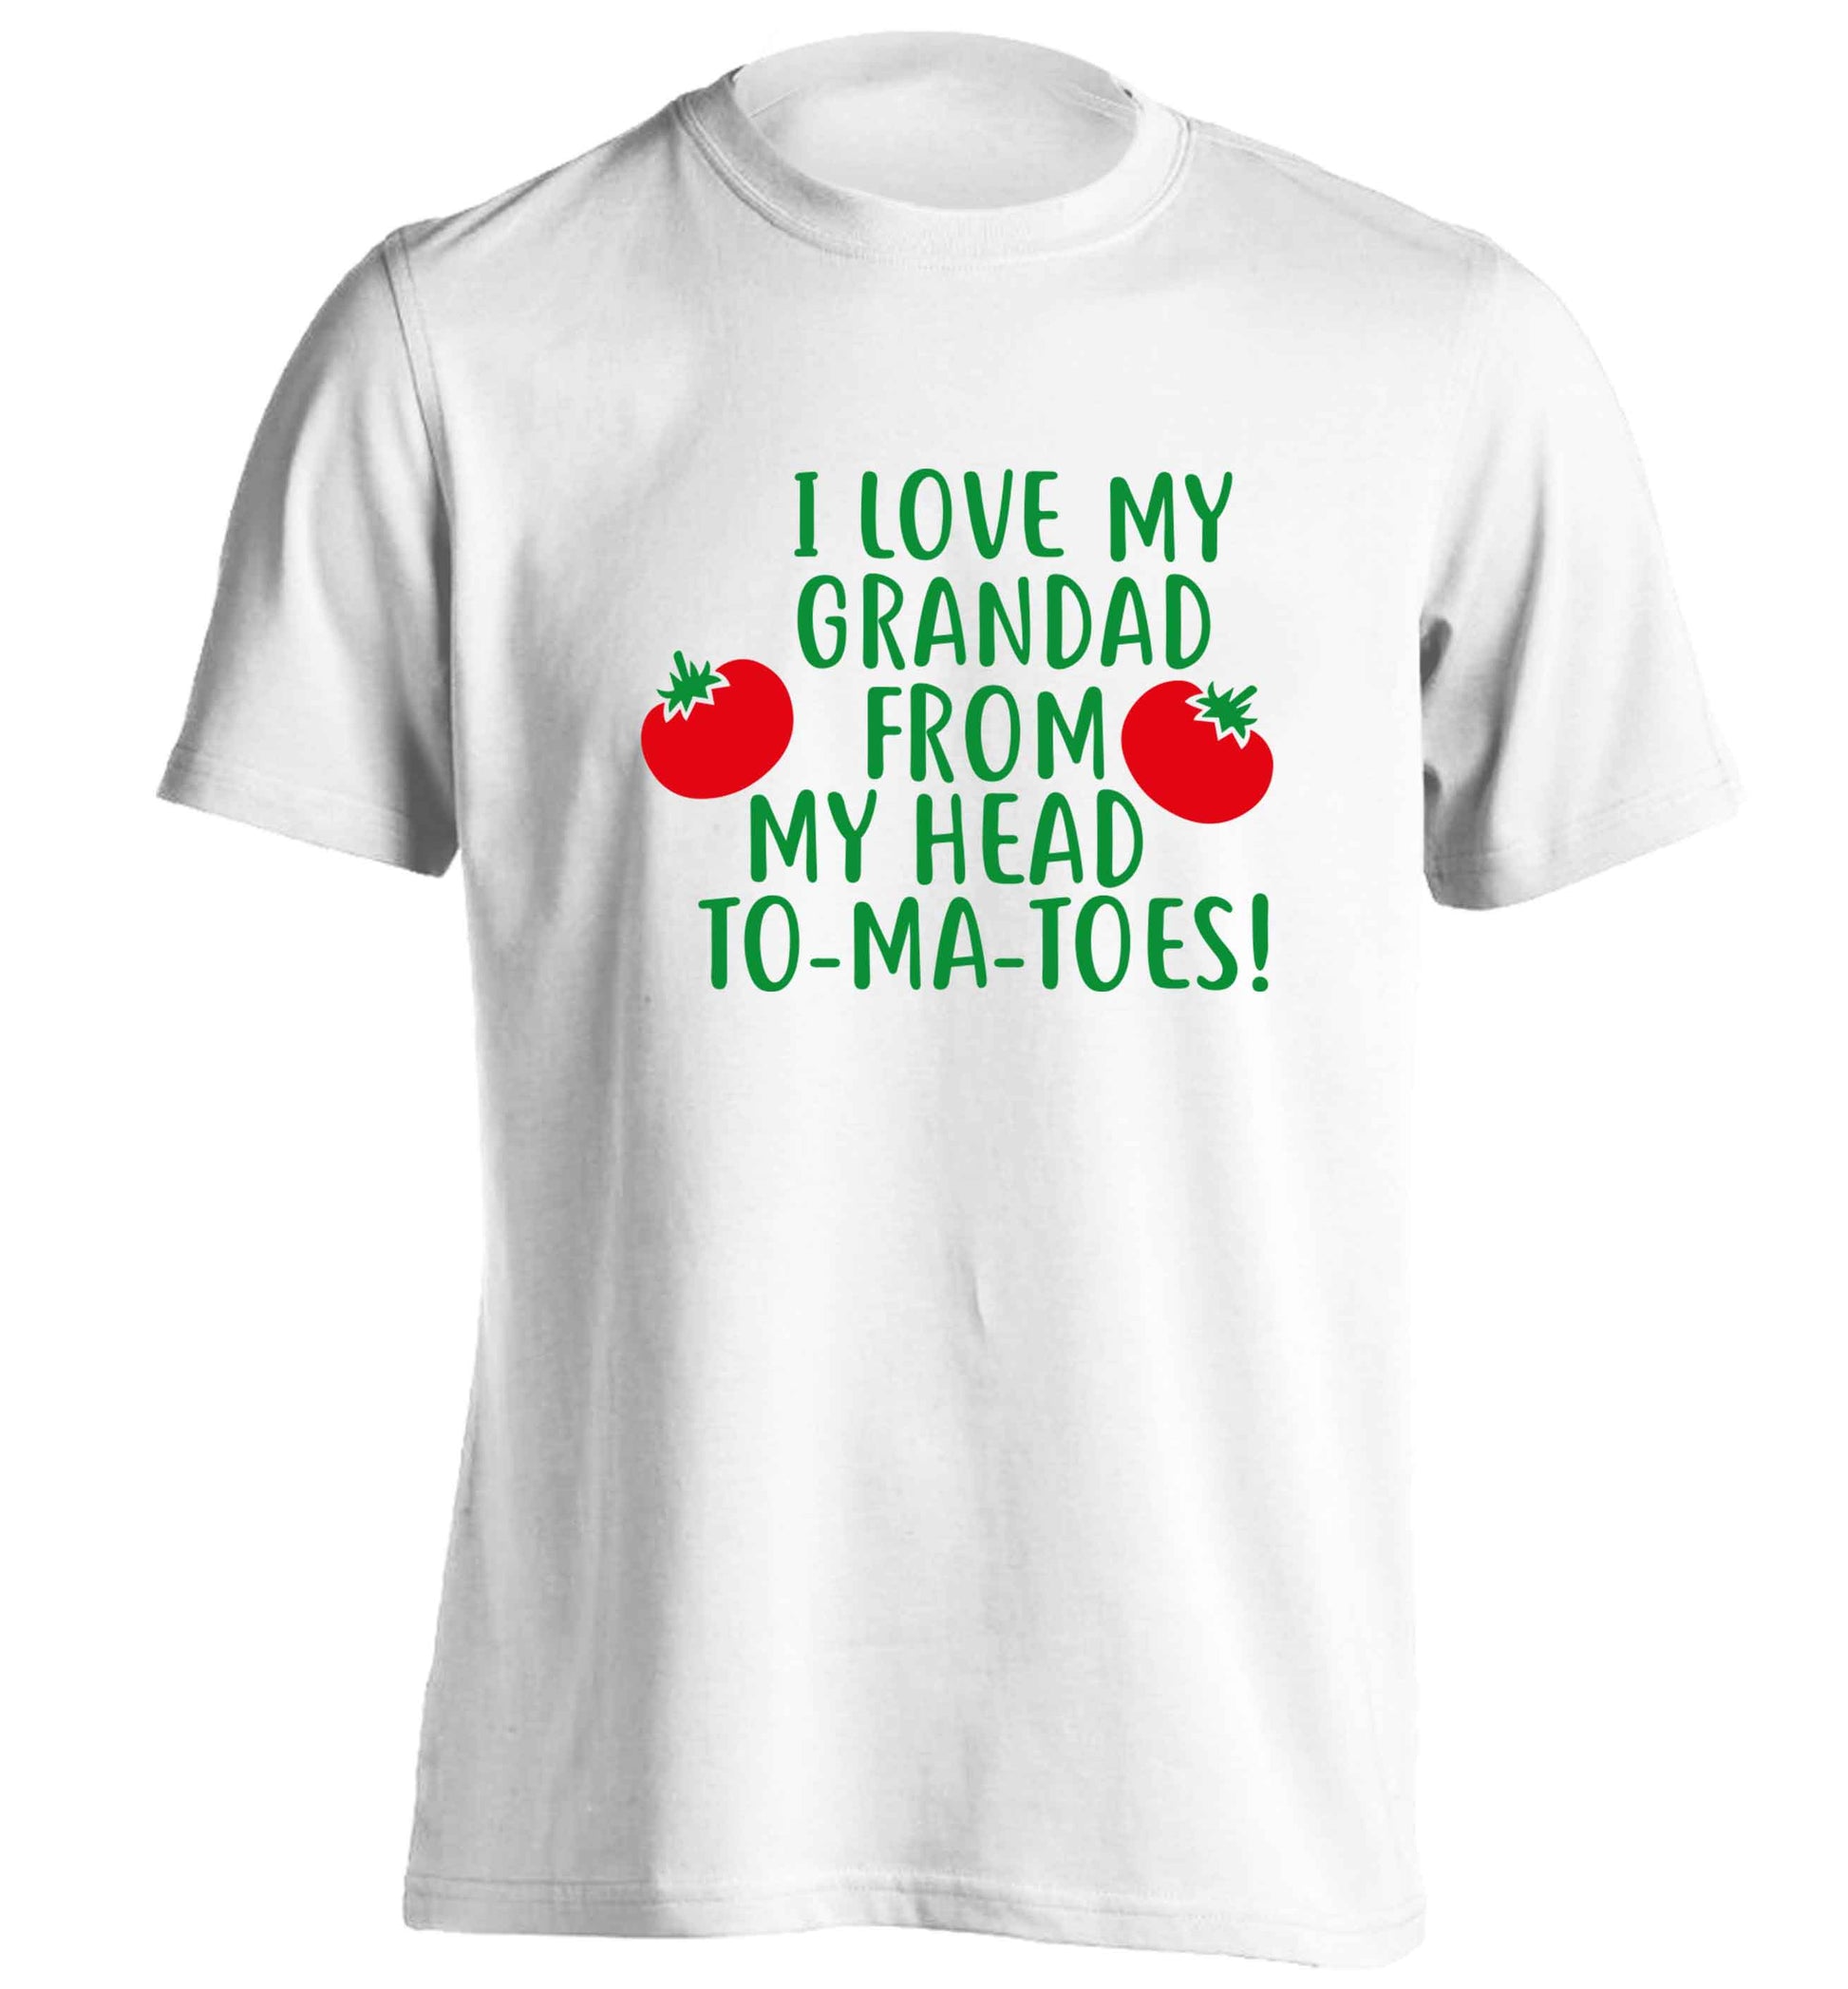 I love my grandad from my head To-Ma-Toes adults unisex white Tshirt 2XL